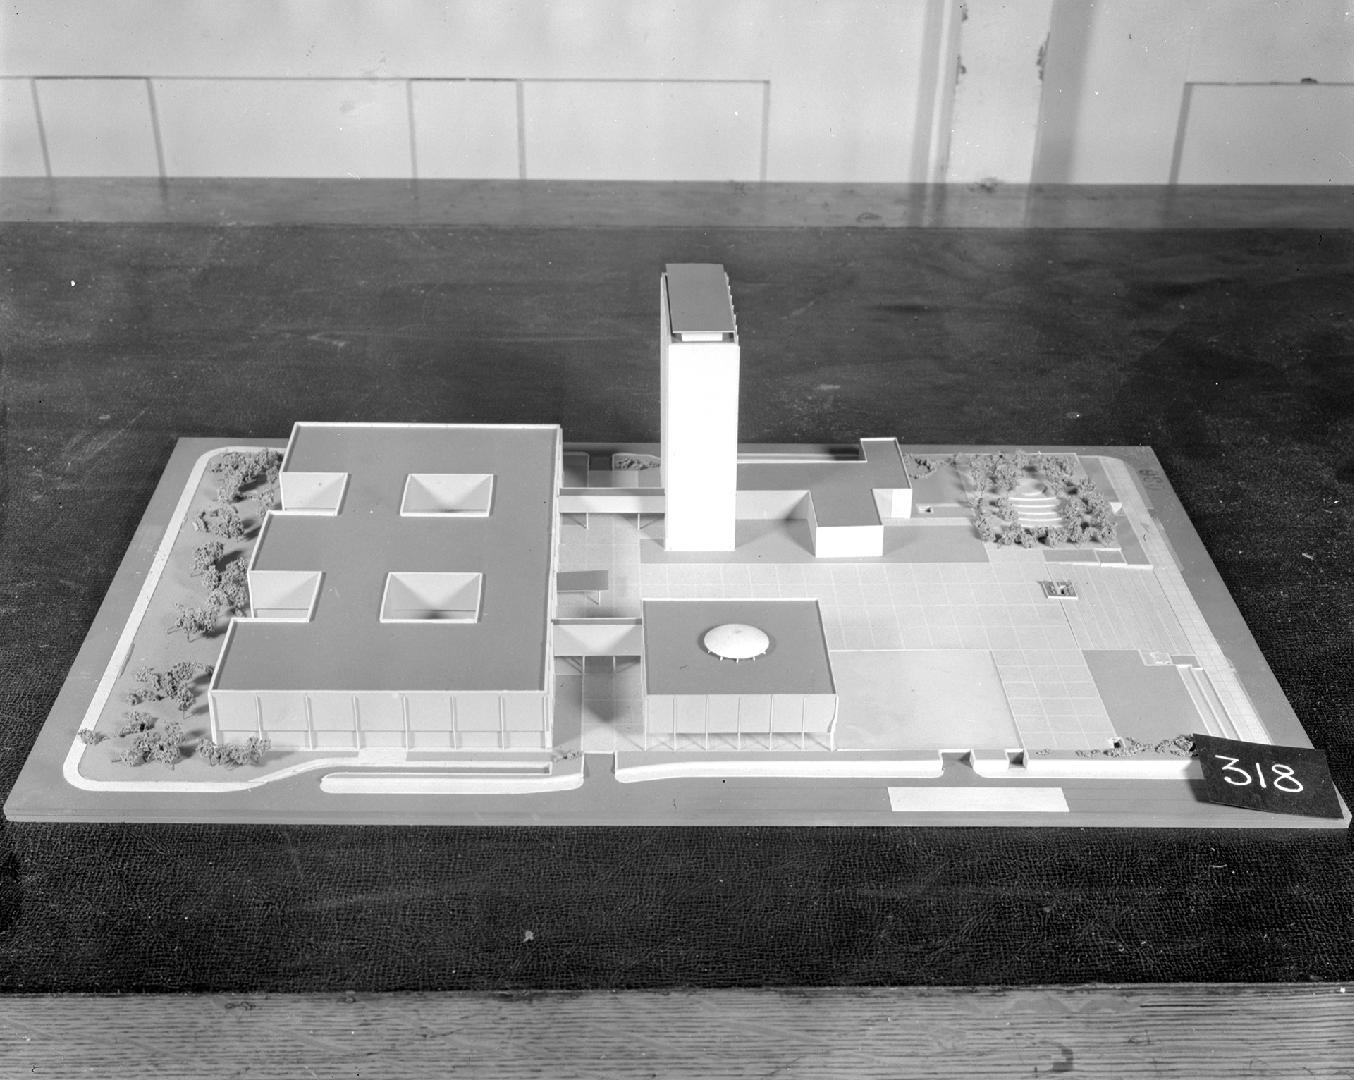 Boissevain & Osmond entry, City Hall and Square Competition, Toronto, 1958, architectural model